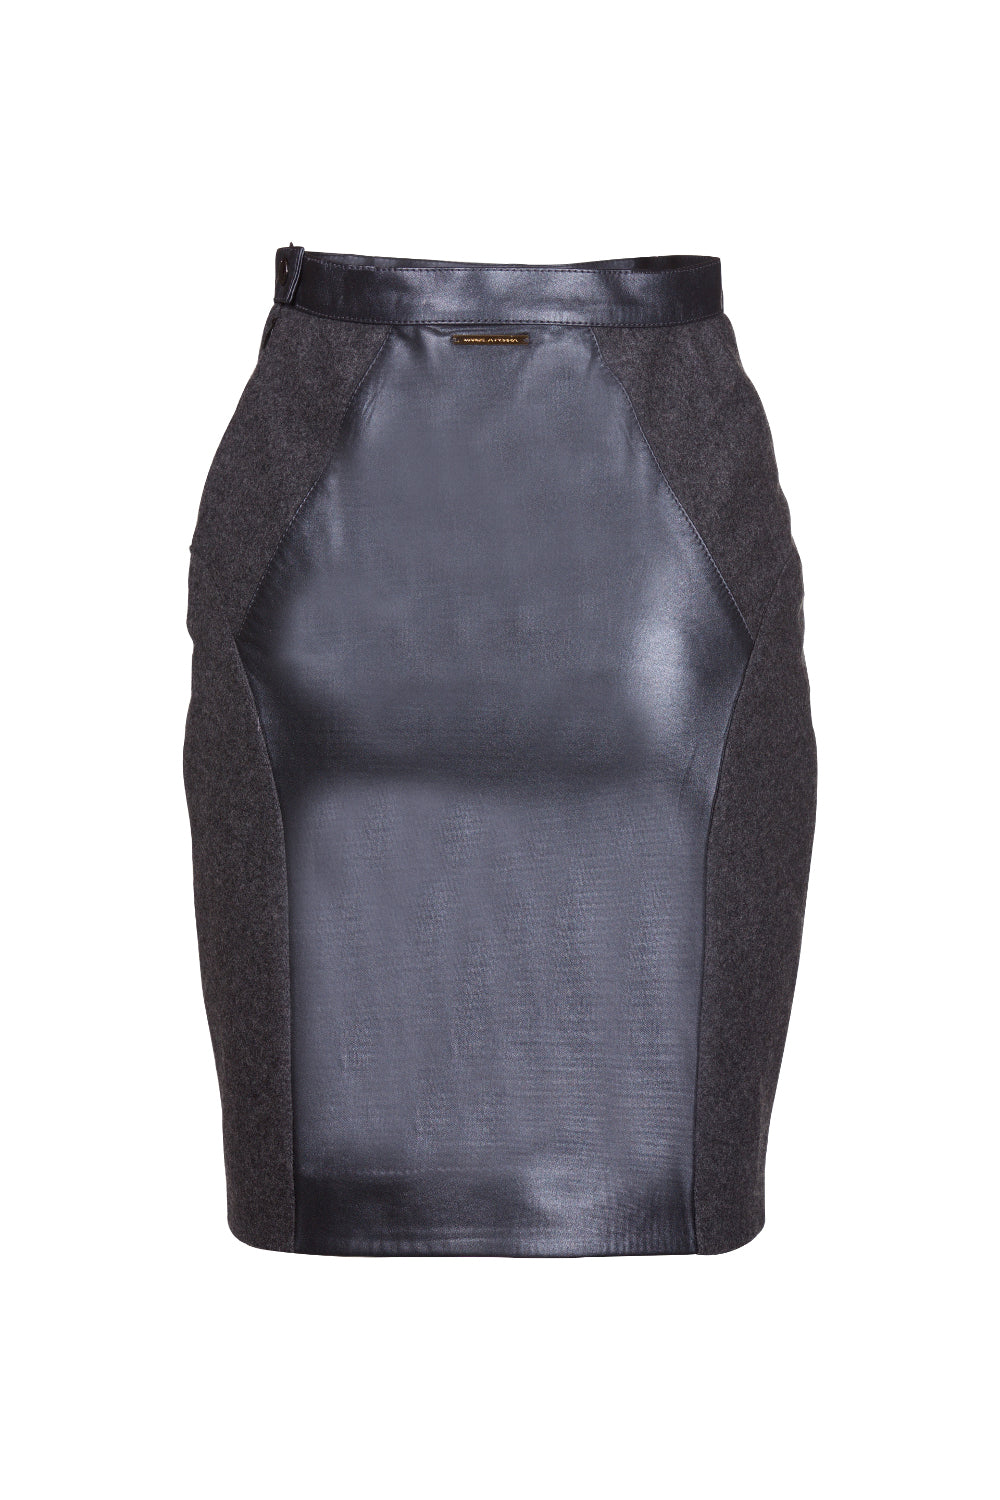 Merino Wool Tailored Reindeer Leather Skirt- Limited Edition